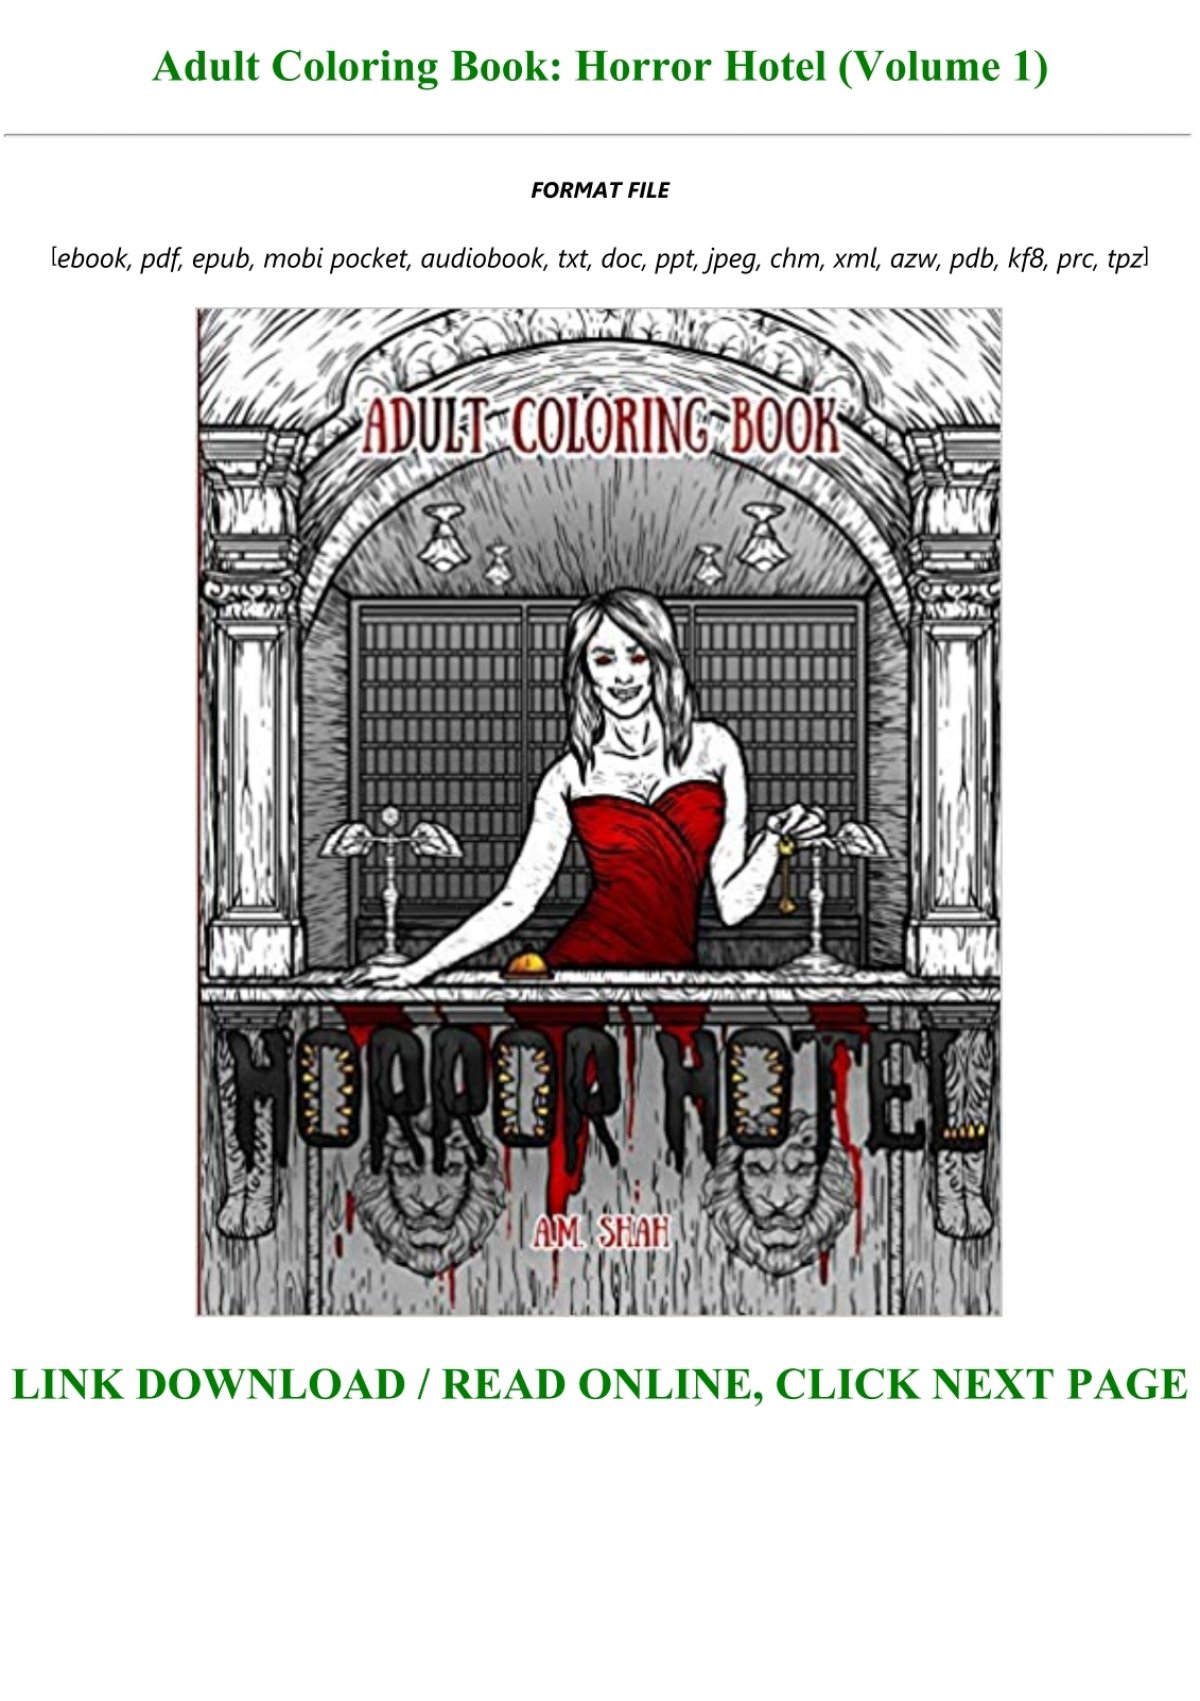 Download Download Pdf Adult Coloring Book Horror Hotel Volume 1 For Any Device